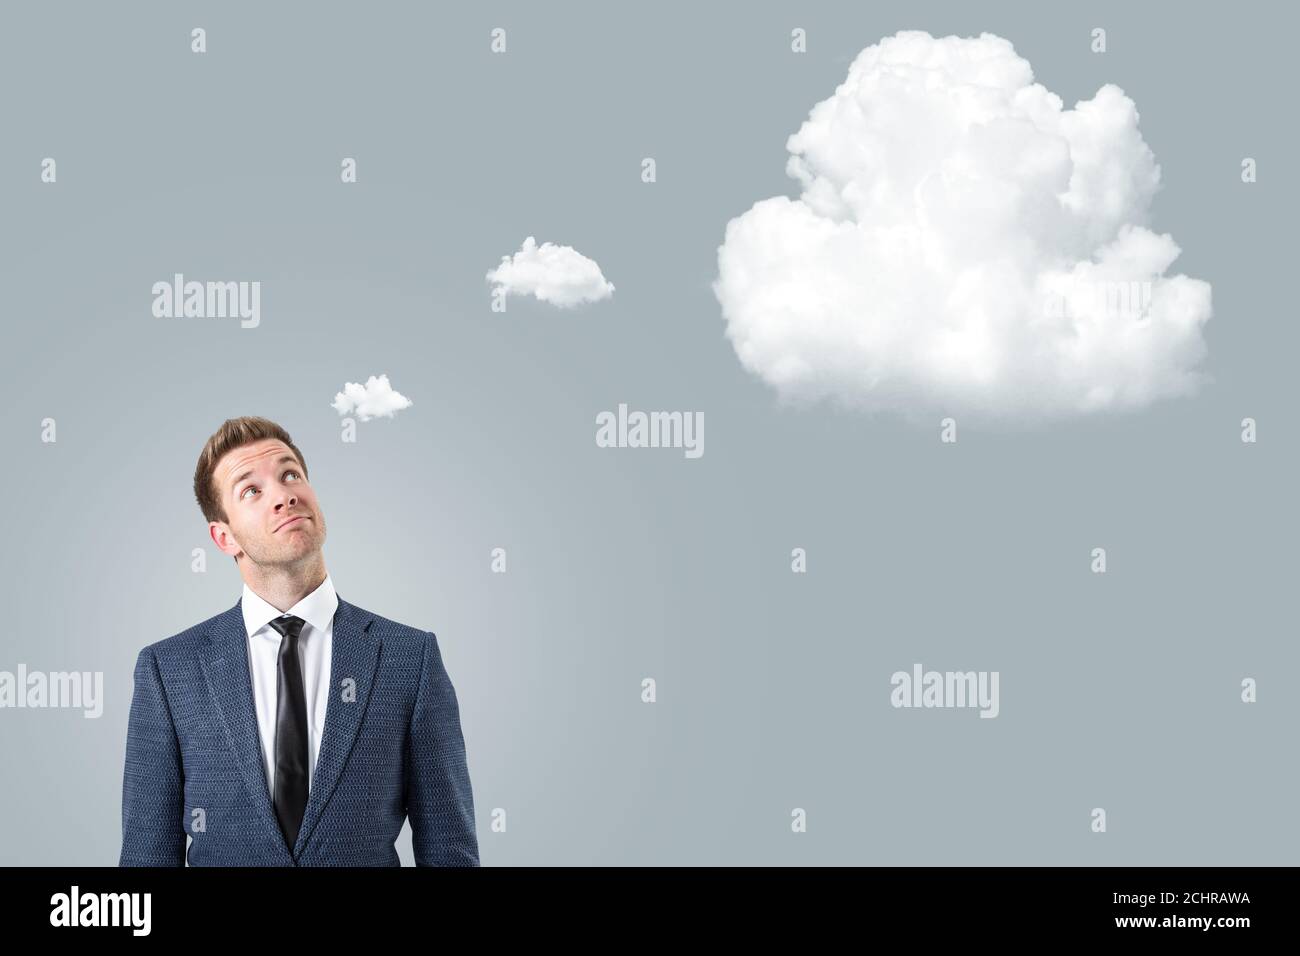 Businessman looking up towards a thought bubble Stock Photo